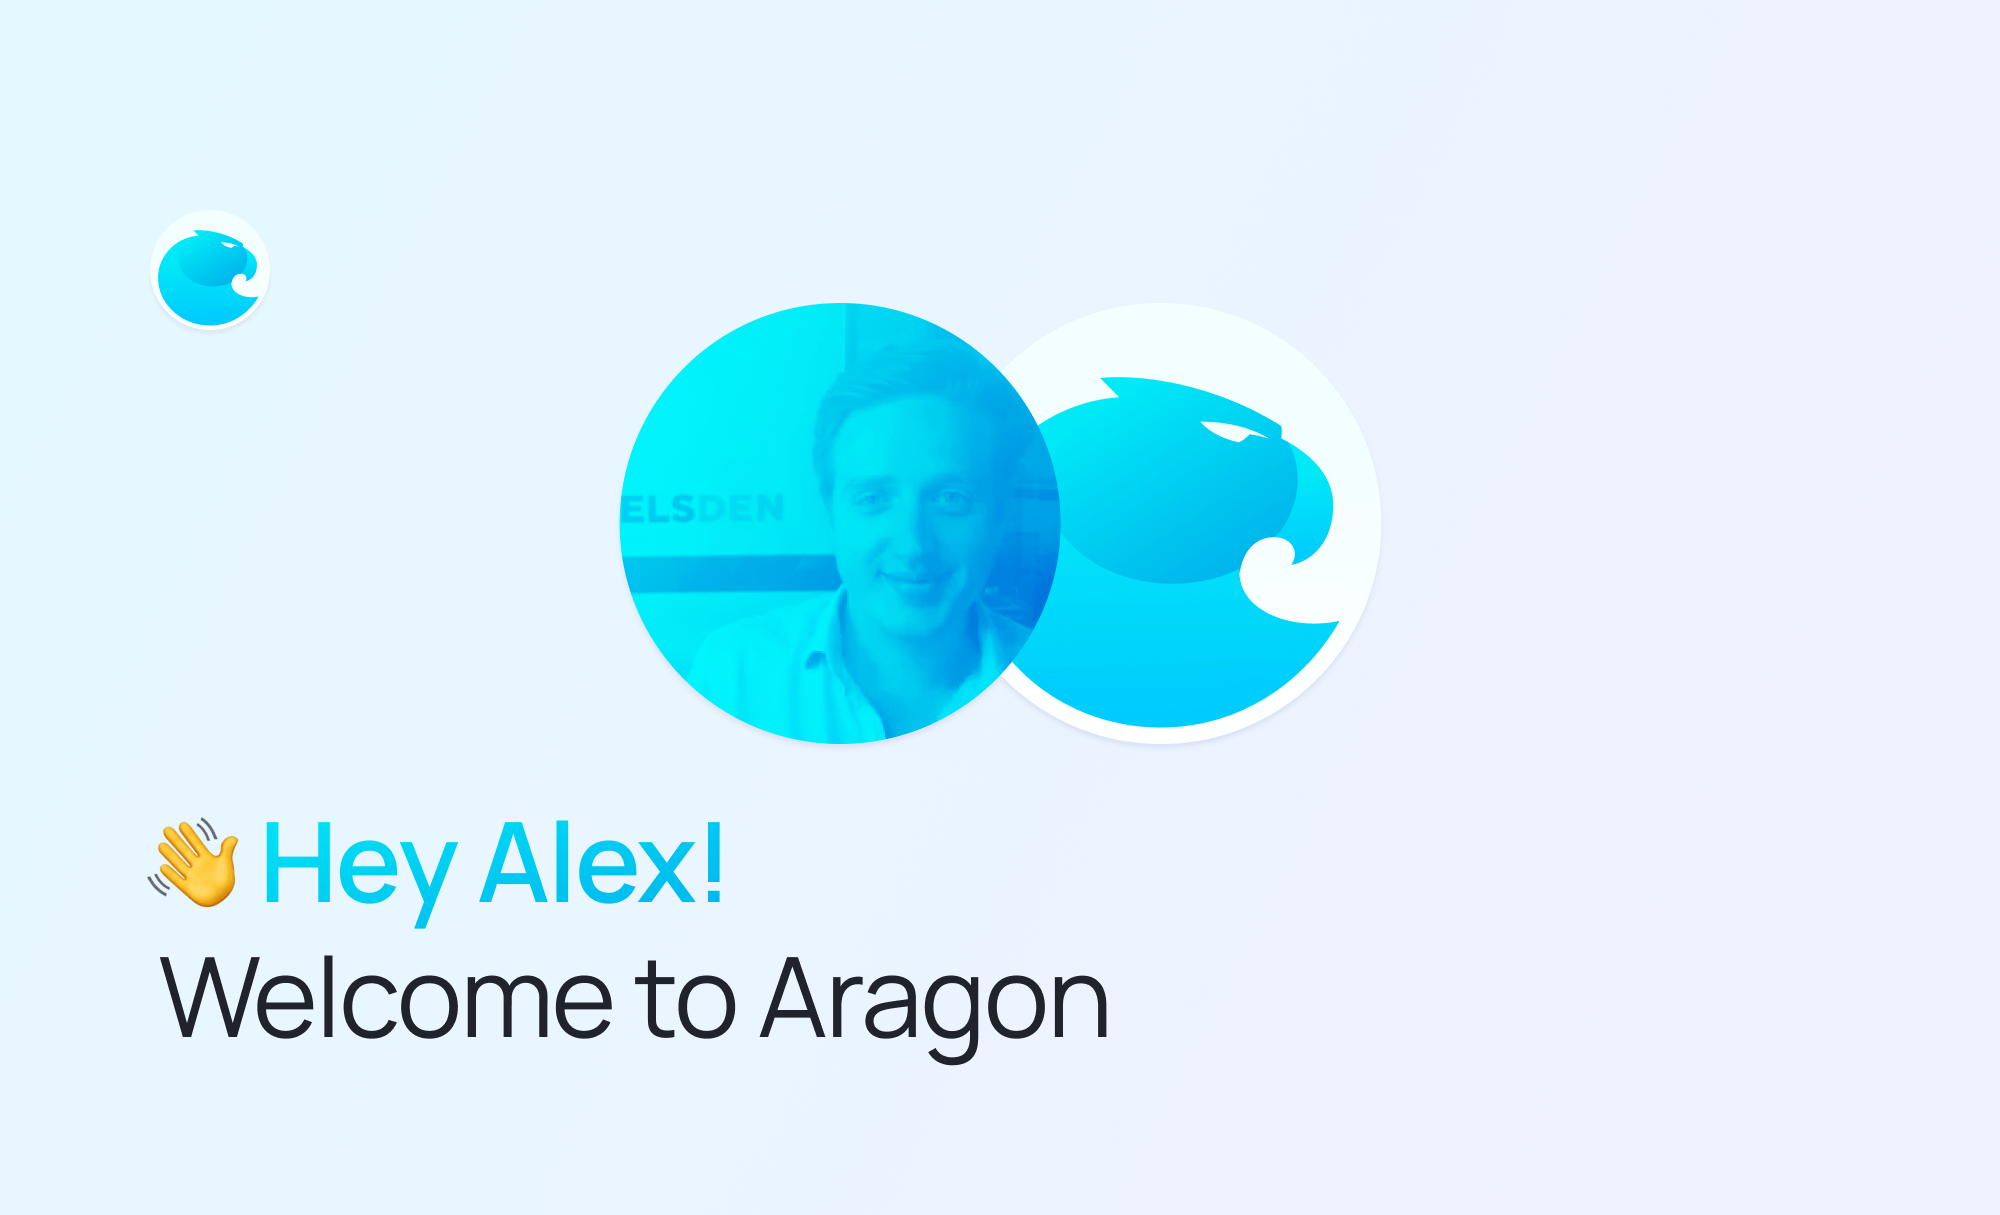 Welcoming Alexander Clayhills as the new Head of Transparency of the Aragon Association